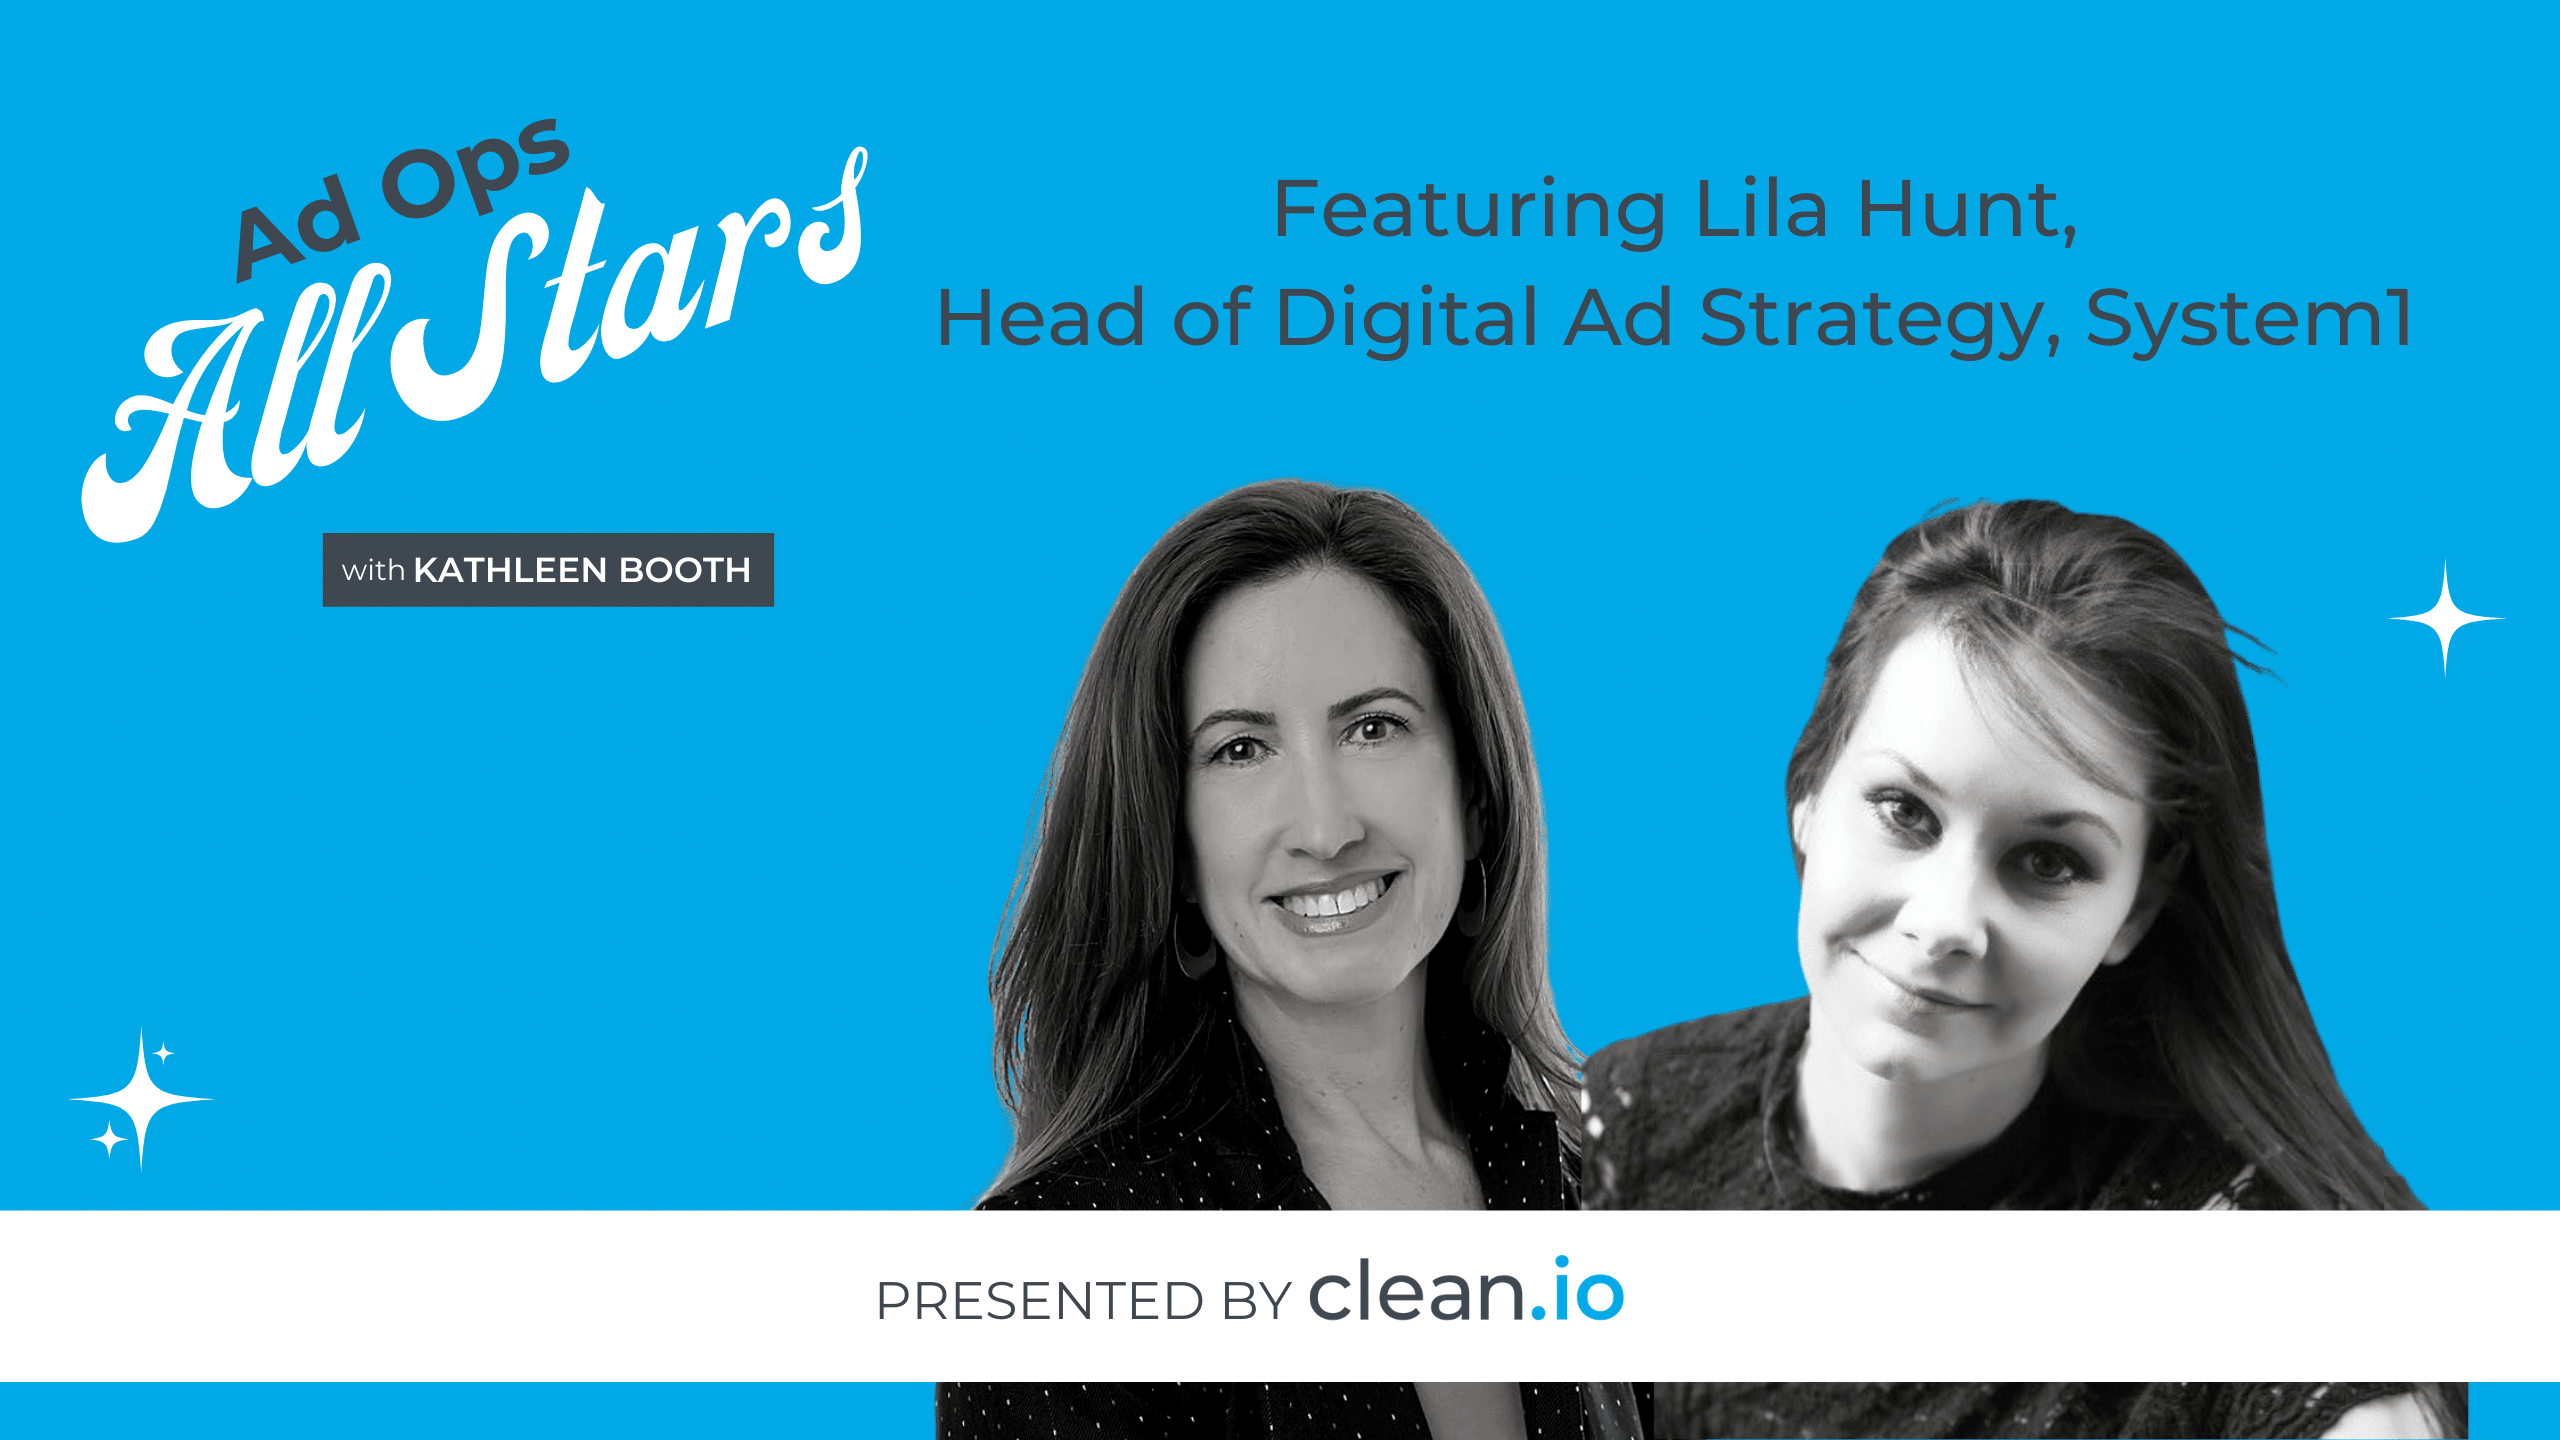 Ad Ops All Stars: Lila Hunt, System1